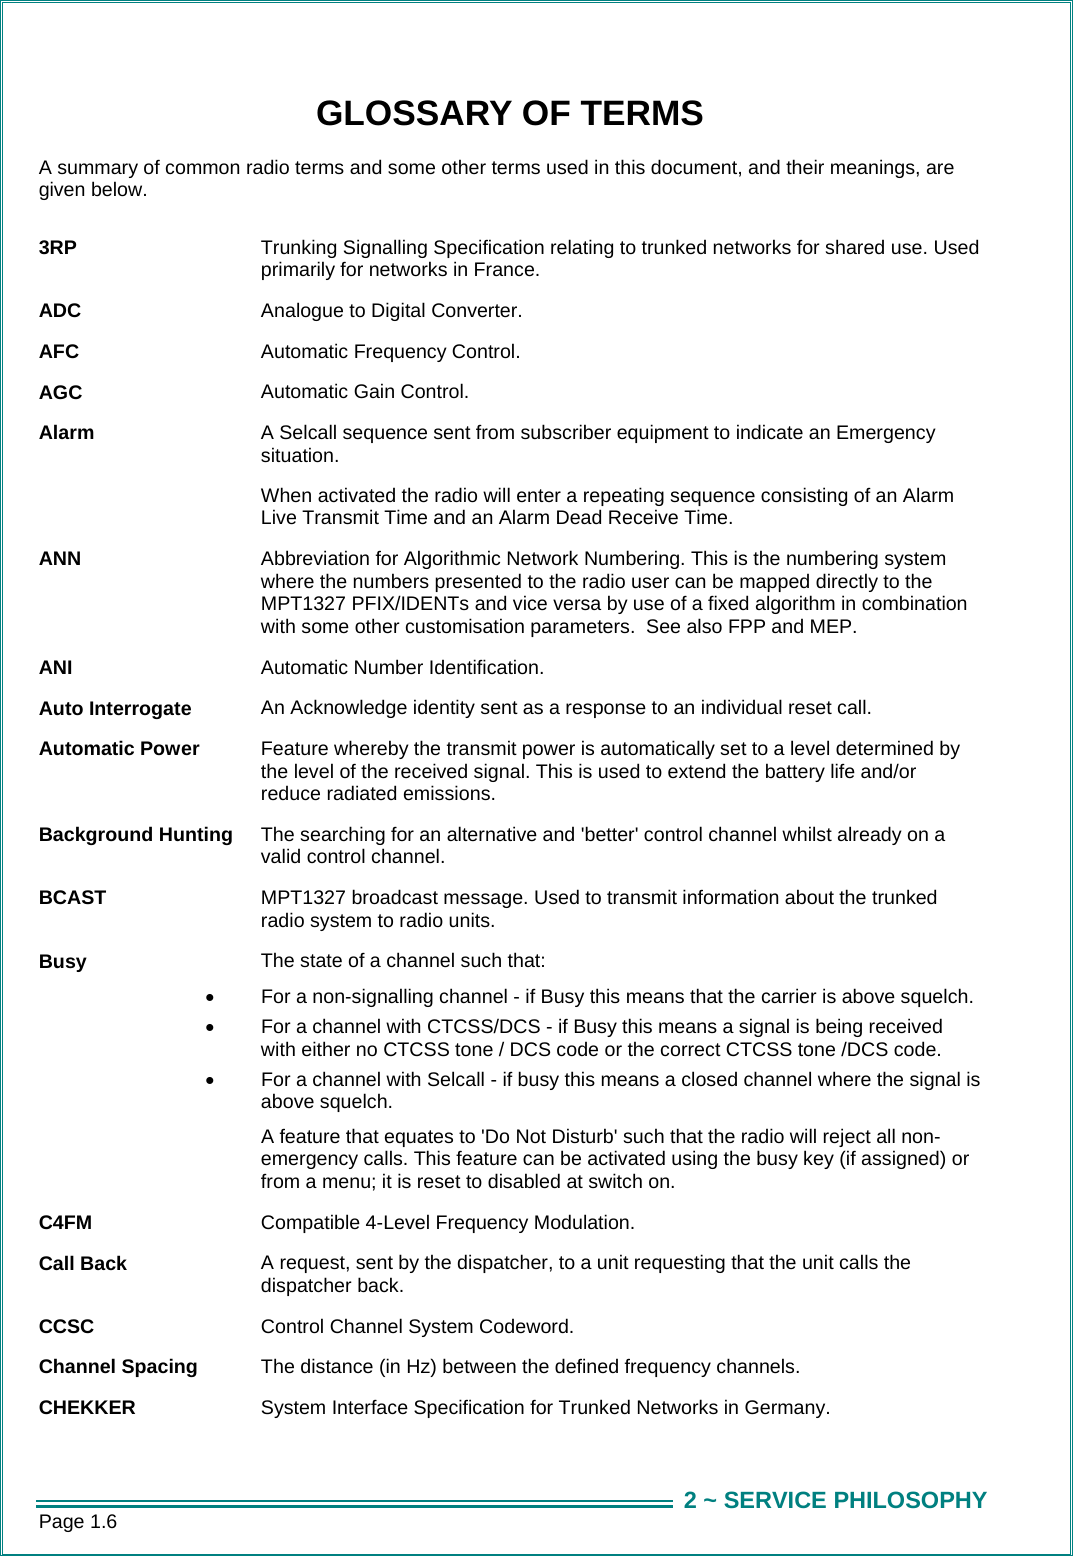 Page 1.6  2 ~ SERVICE PHILOSOPHYGLOSSARY OF TERMS A summary of common radio terms and some other terms used in this document, and their meanings, are given below.  3RP  Trunking Signalling Specification relating to trunked networks for shared use. Used primarily for networks in France. ADC  Analogue to Digital Converter. AFC  Automatic Frequency Control. AGC  Automatic Gain Control. Alarm  A Selcall sequence sent from subscriber equipment to indicate an Emergency situation.   When activated the radio will enter a repeating sequence consisting of an Alarm Live Transmit Time and an Alarm Dead Receive Time. ANN  Abbreviation for Algorithmic Network Numbering. This is the numbering system where the numbers presented to the radio user can be mapped directly to the MPT1327 PFIX/IDENTs and vice versa by use of a fixed algorithm in combination with some other customisation parameters.  See also FPP and MEP. ANI  Automatic Number Identification. Auto Interrogate  An Acknowledge identity sent as a response to an individual reset call. Automatic Power  Feature whereby the transmit power is automatically set to a level determined by the level of the received signal. This is used to extend the battery life and/or reduce radiated emissions. Background Hunting  The searching for an alternative and &apos;better&apos; control channel whilst already on a valid control channel. BCAST  MPT1327 broadcast message. Used to transmit information about the trunked radio system to radio units. Busy  The state of a channel such that: •  For a non-signalling channel - if Busy this means that the carrier is above squelch. •  For a channel with CTCSS/DCS - if Busy this means a signal is being received with either no CTCSS tone / DCS code or the correct CTCSS tone /DCS code. •  For a channel with Selcall - if busy this means a closed channel where the signal is above squelch.   A feature that equates to &apos;Do Not Disturb&apos; such that the radio will reject all non-emergency calls. This feature can be activated using the busy key (if assigned) or from a menu; it is reset to disabled at switch on. C4FM  Compatible 4-Level Frequency Modulation. Call Back  A request, sent by the dispatcher, to a unit requesting that the unit calls the dispatcher back. CCSC   Control Channel System Codeword.   Channel Spacing  The distance (in Hz) between the defined frequency channels.  CHEKKER  System Interface Specification for Trunked Networks in Germany. 